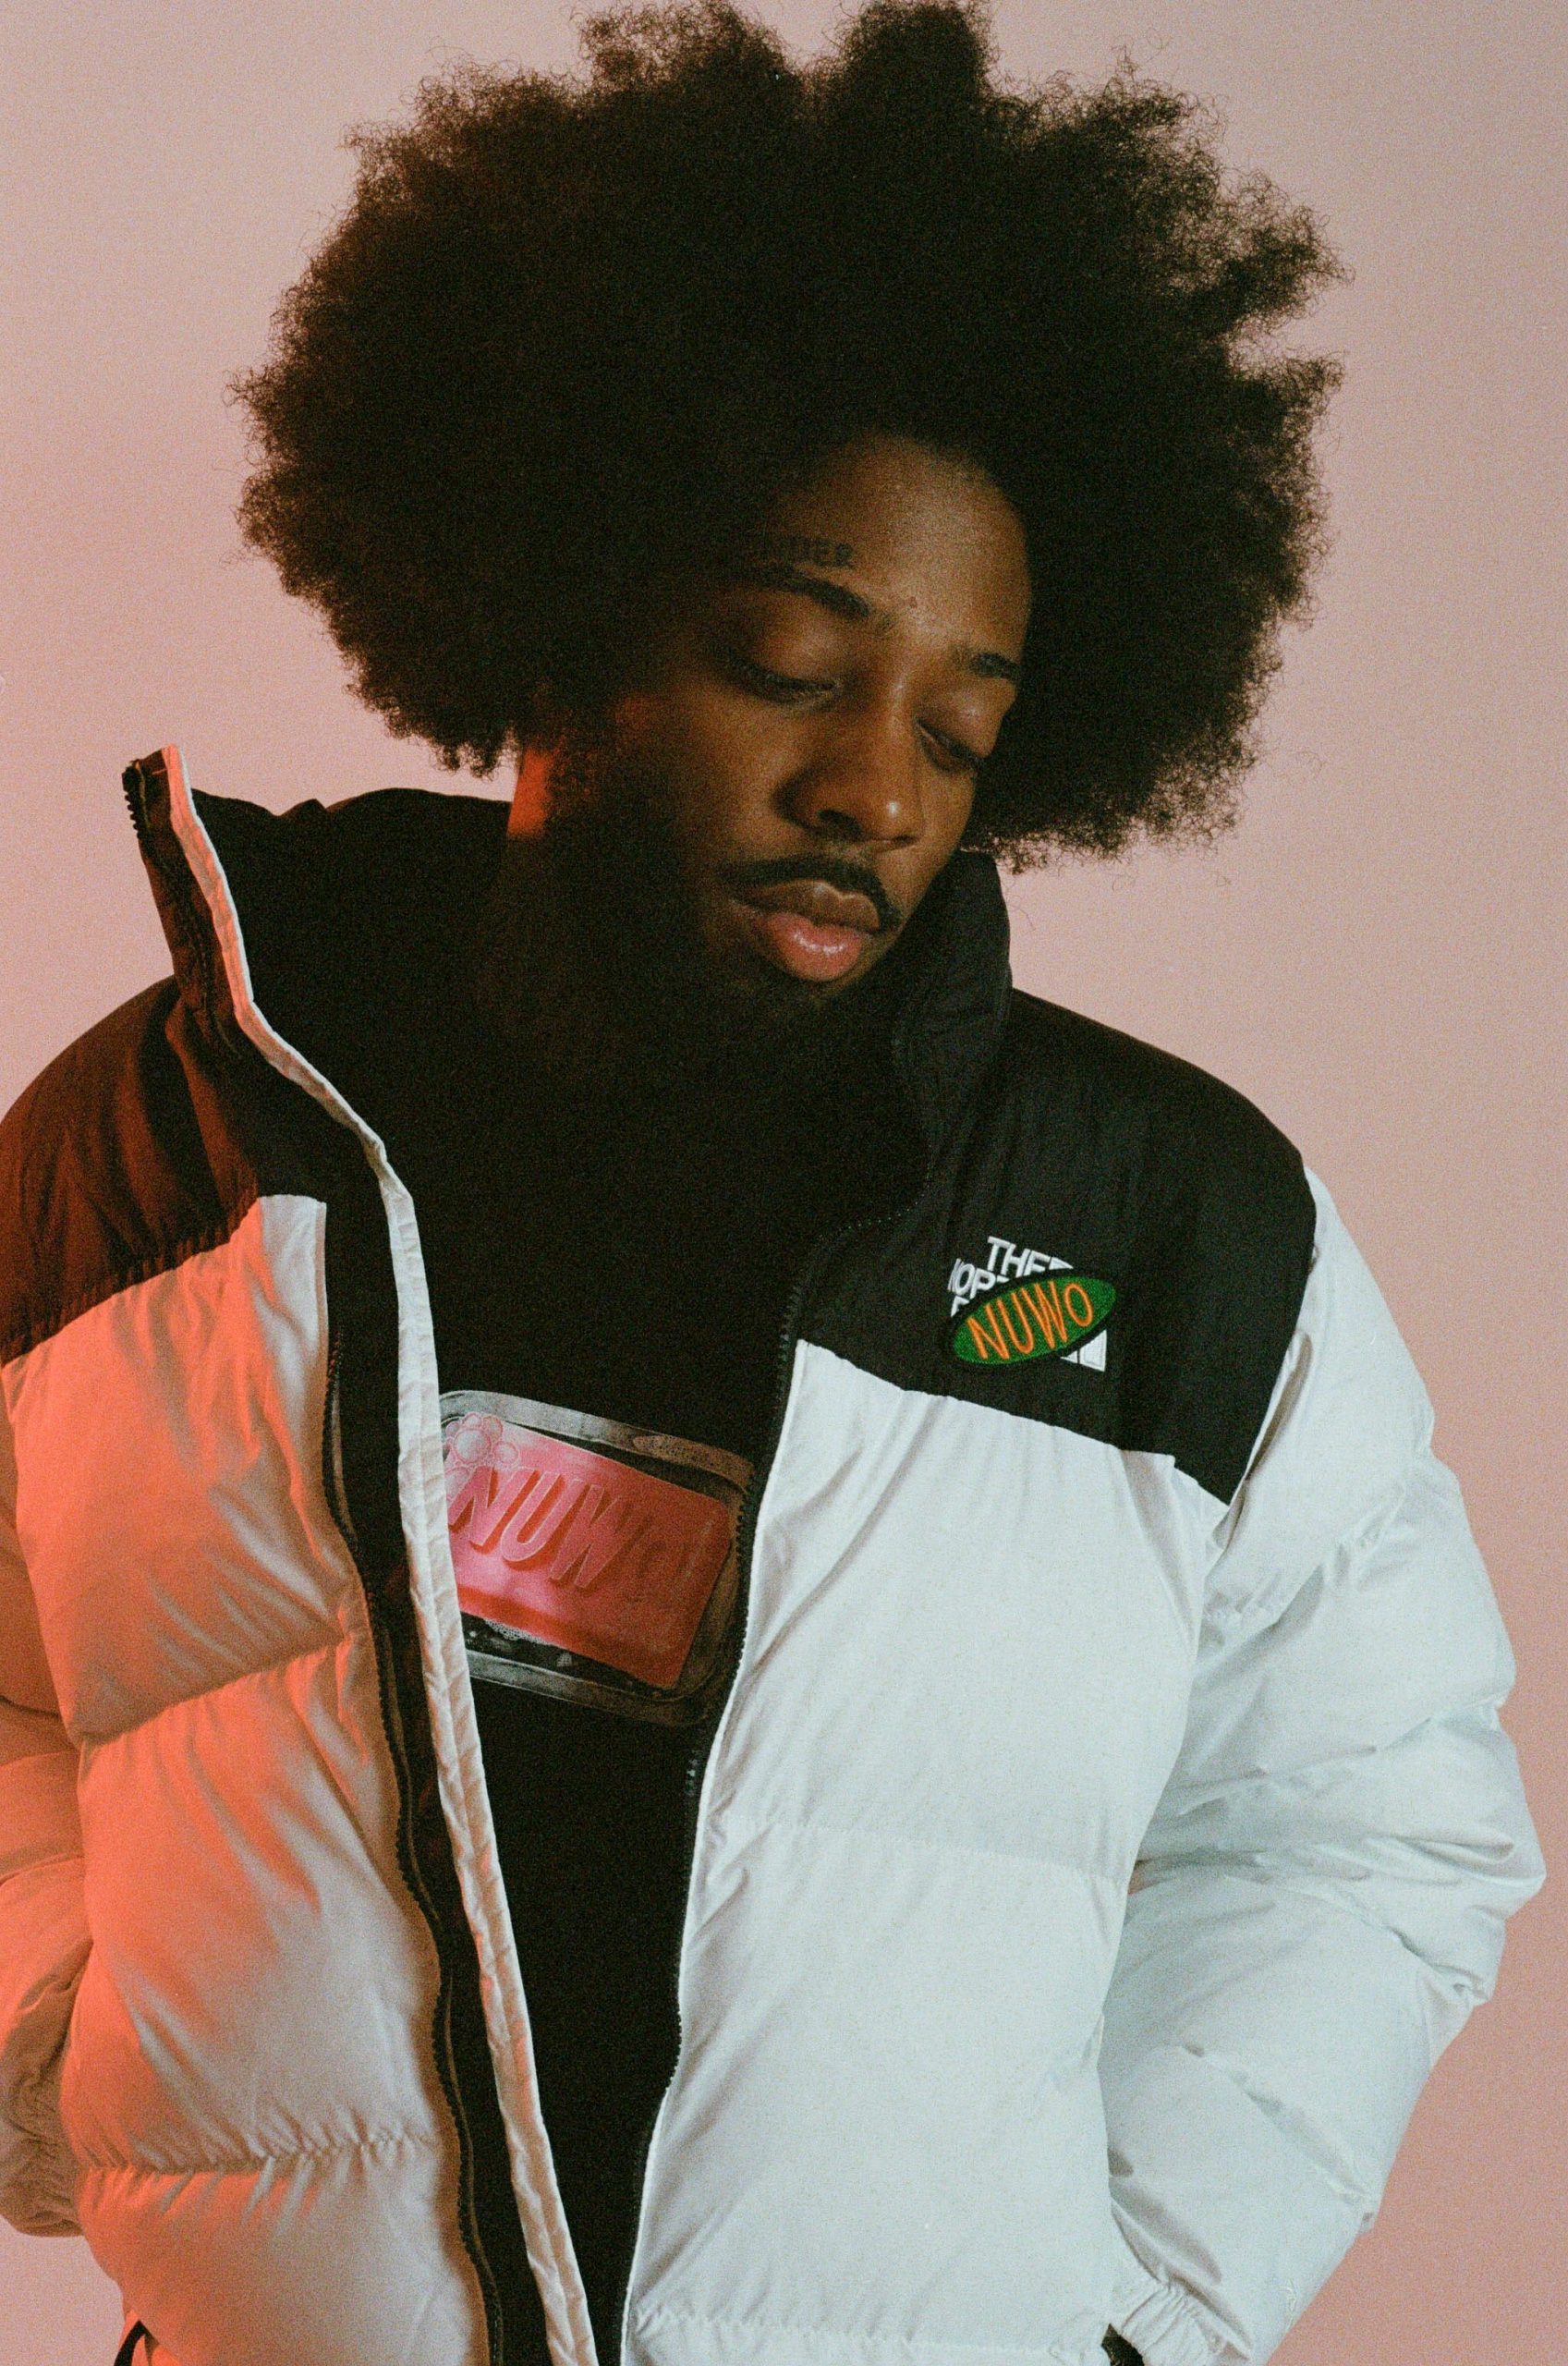 A person with an afro and white jacket